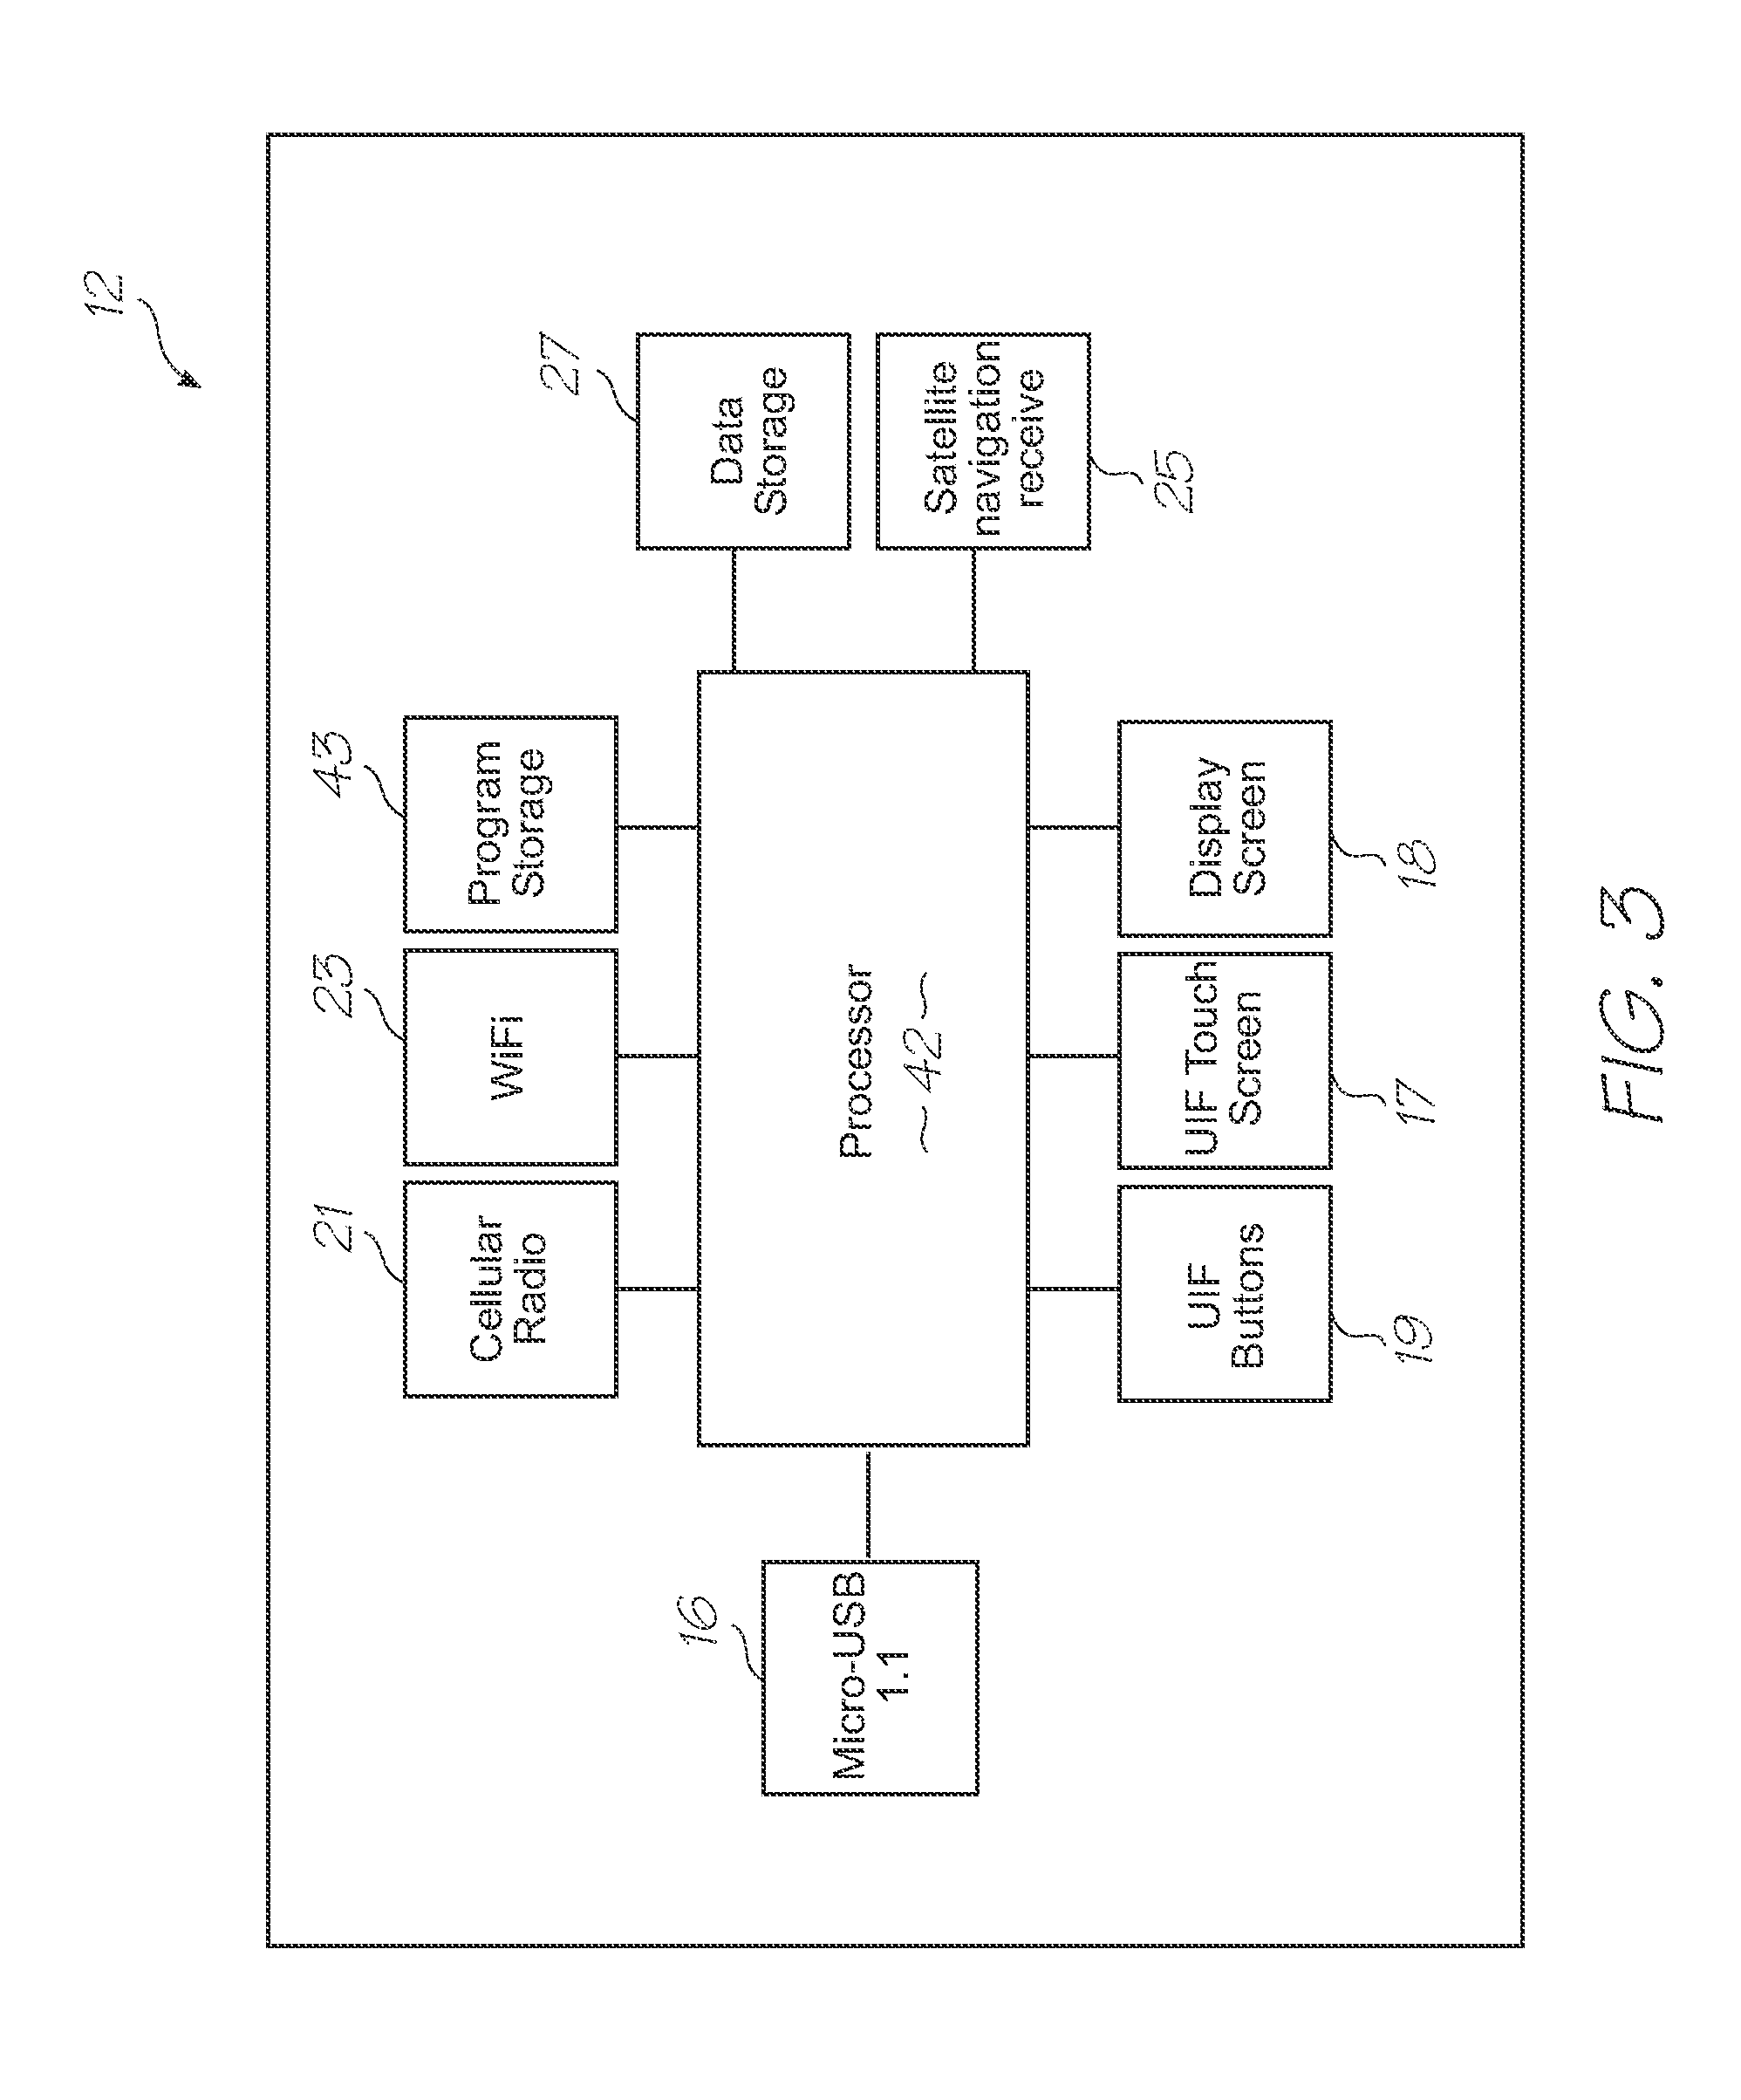 Genetic analysis loc device with electrochemiluminescent probes having a functional moiety for quenching photon emissions configured to change proximity to a luminophore upon forming a probe-target hybrid